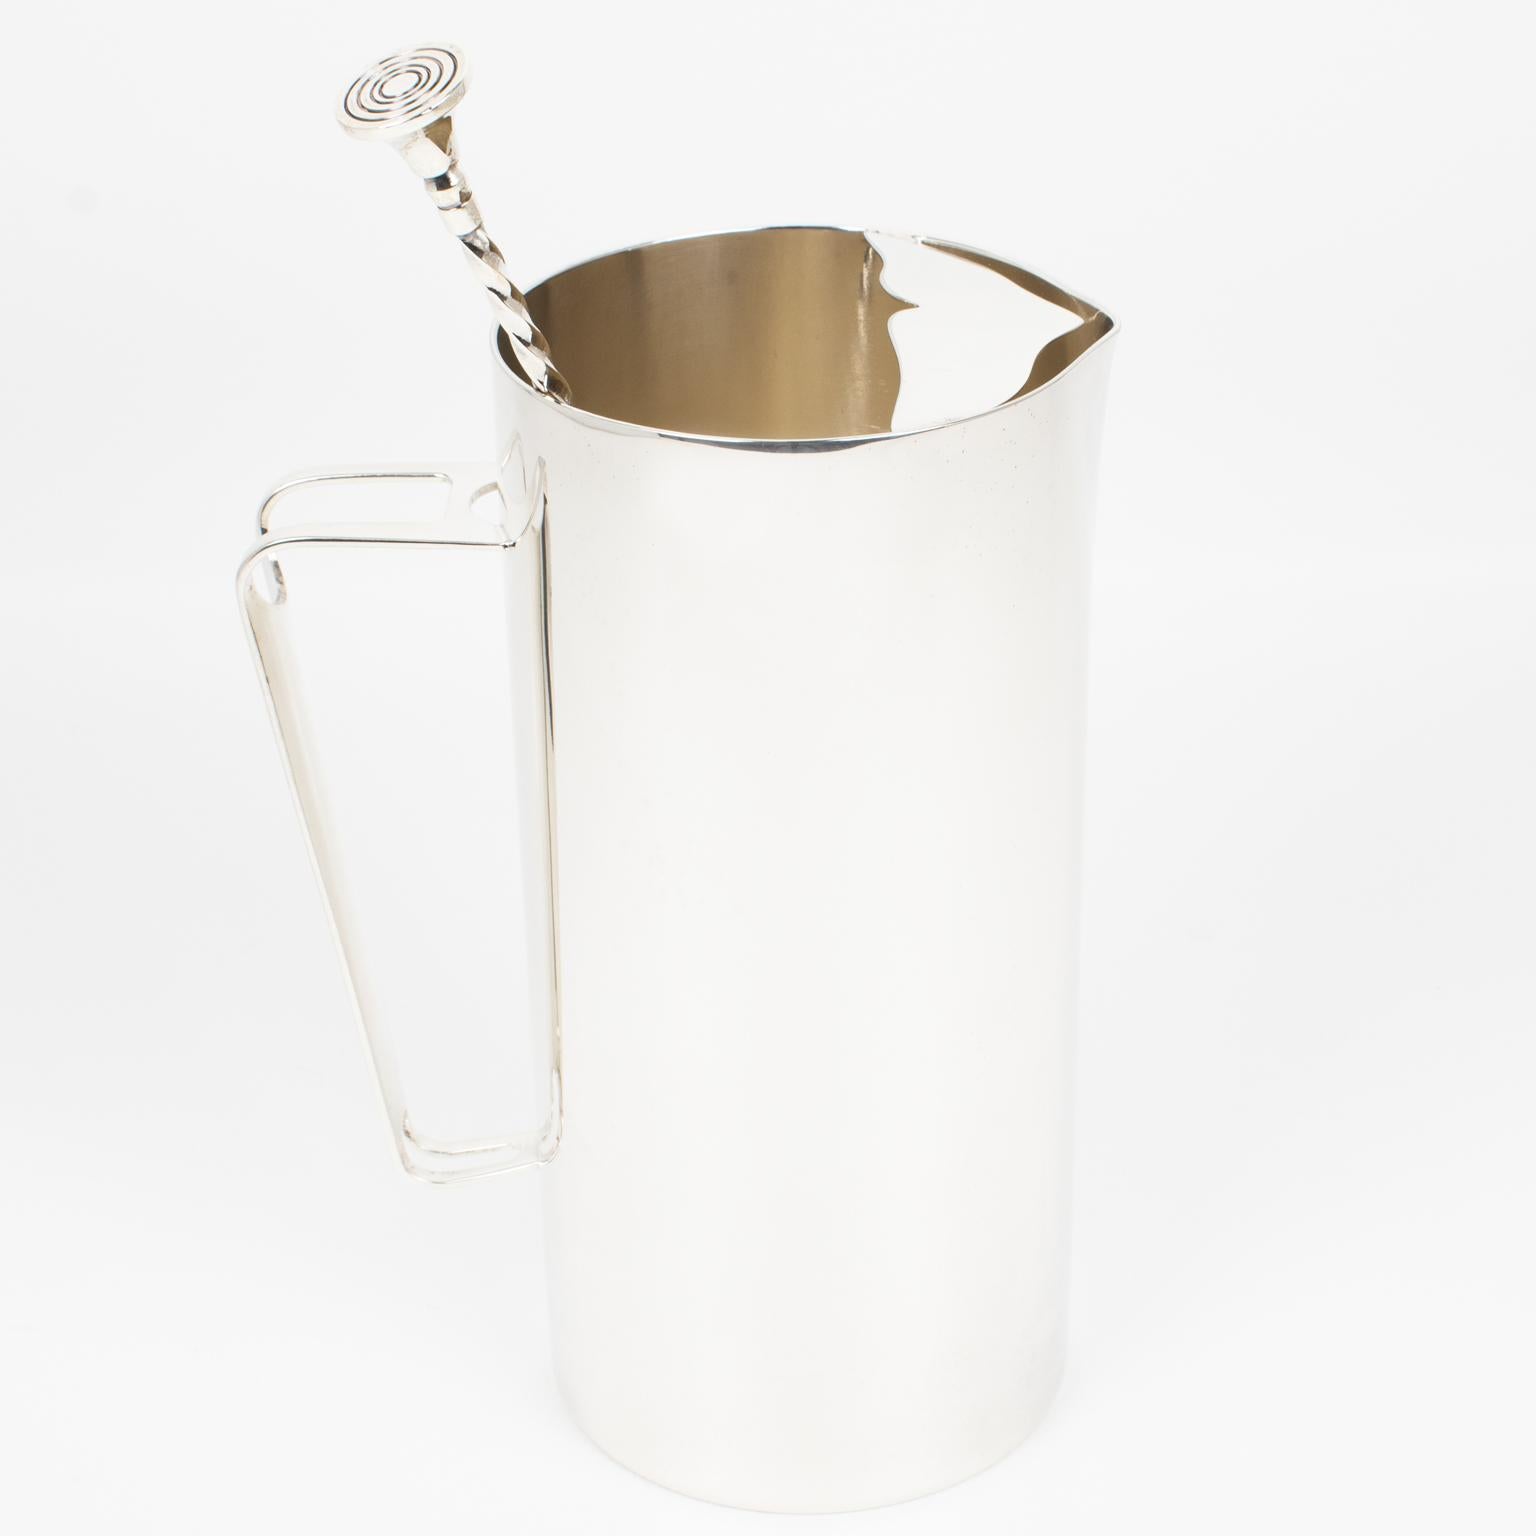 Christofle, Paris, designed this sophisticated barware set in the 1960s. The silver plate martini pitcher or mixer jug has a sleek and modernist shape and comes with a long stirrer spoon. The long spoon is marked with the company's legal silversmith